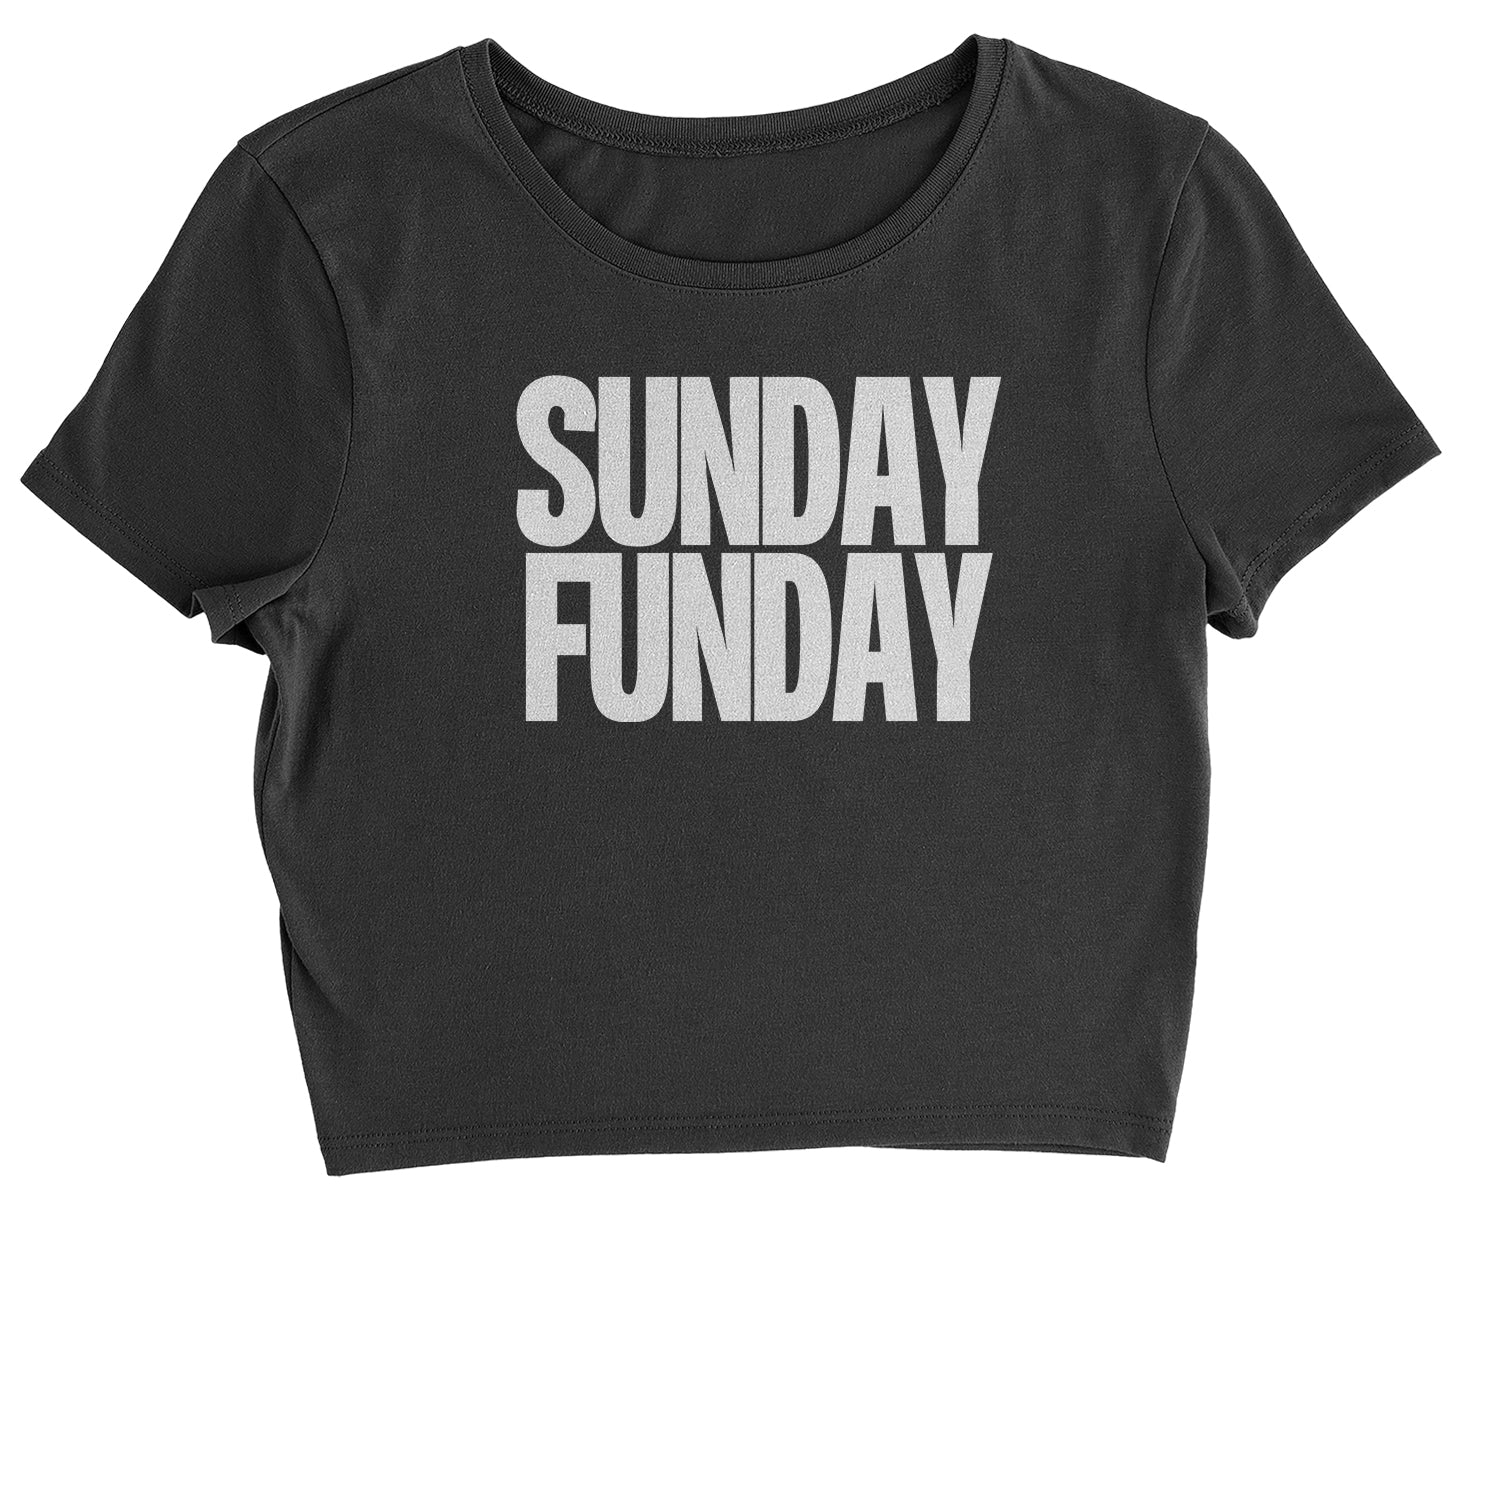 Sunday Funday Cropped T-Shirt day, drinking, fun, funday, partying, sun, Sunday by Expression Tees